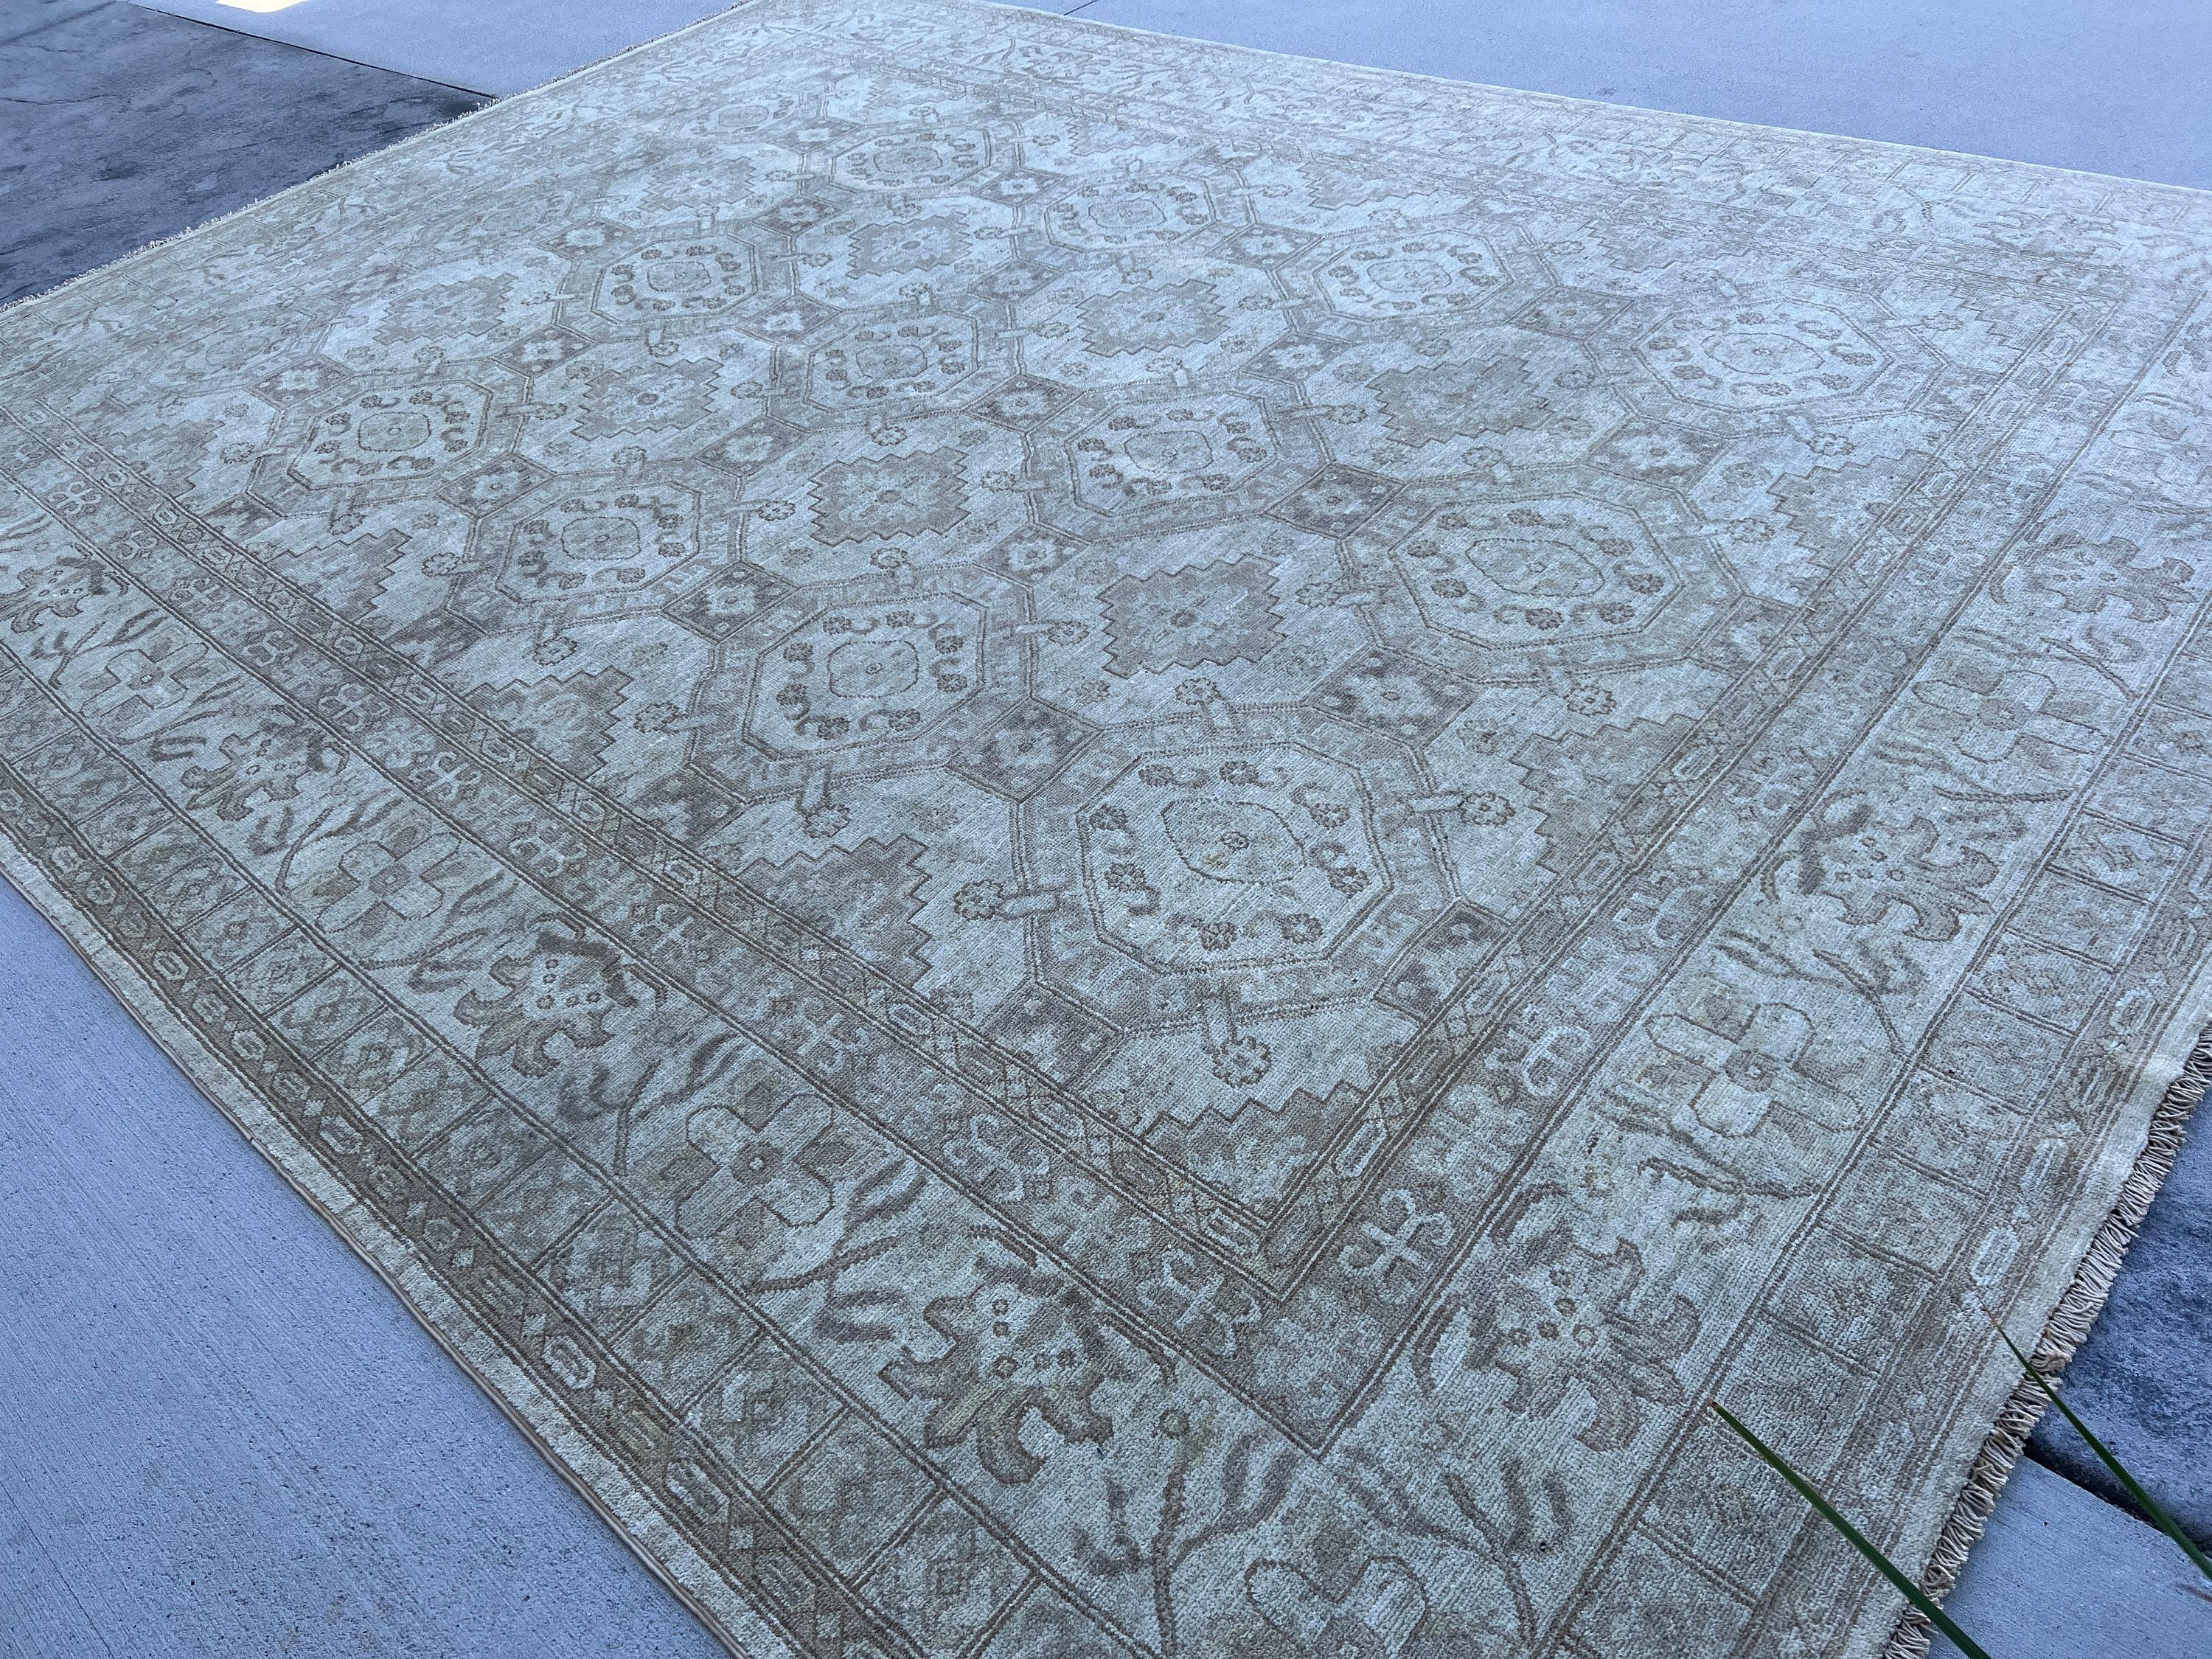 Hand-Knotted Afghan Rug Premium Hand-Spun Afghan Wool Muted Neutral In New Condition For Sale In San Marcos, CA